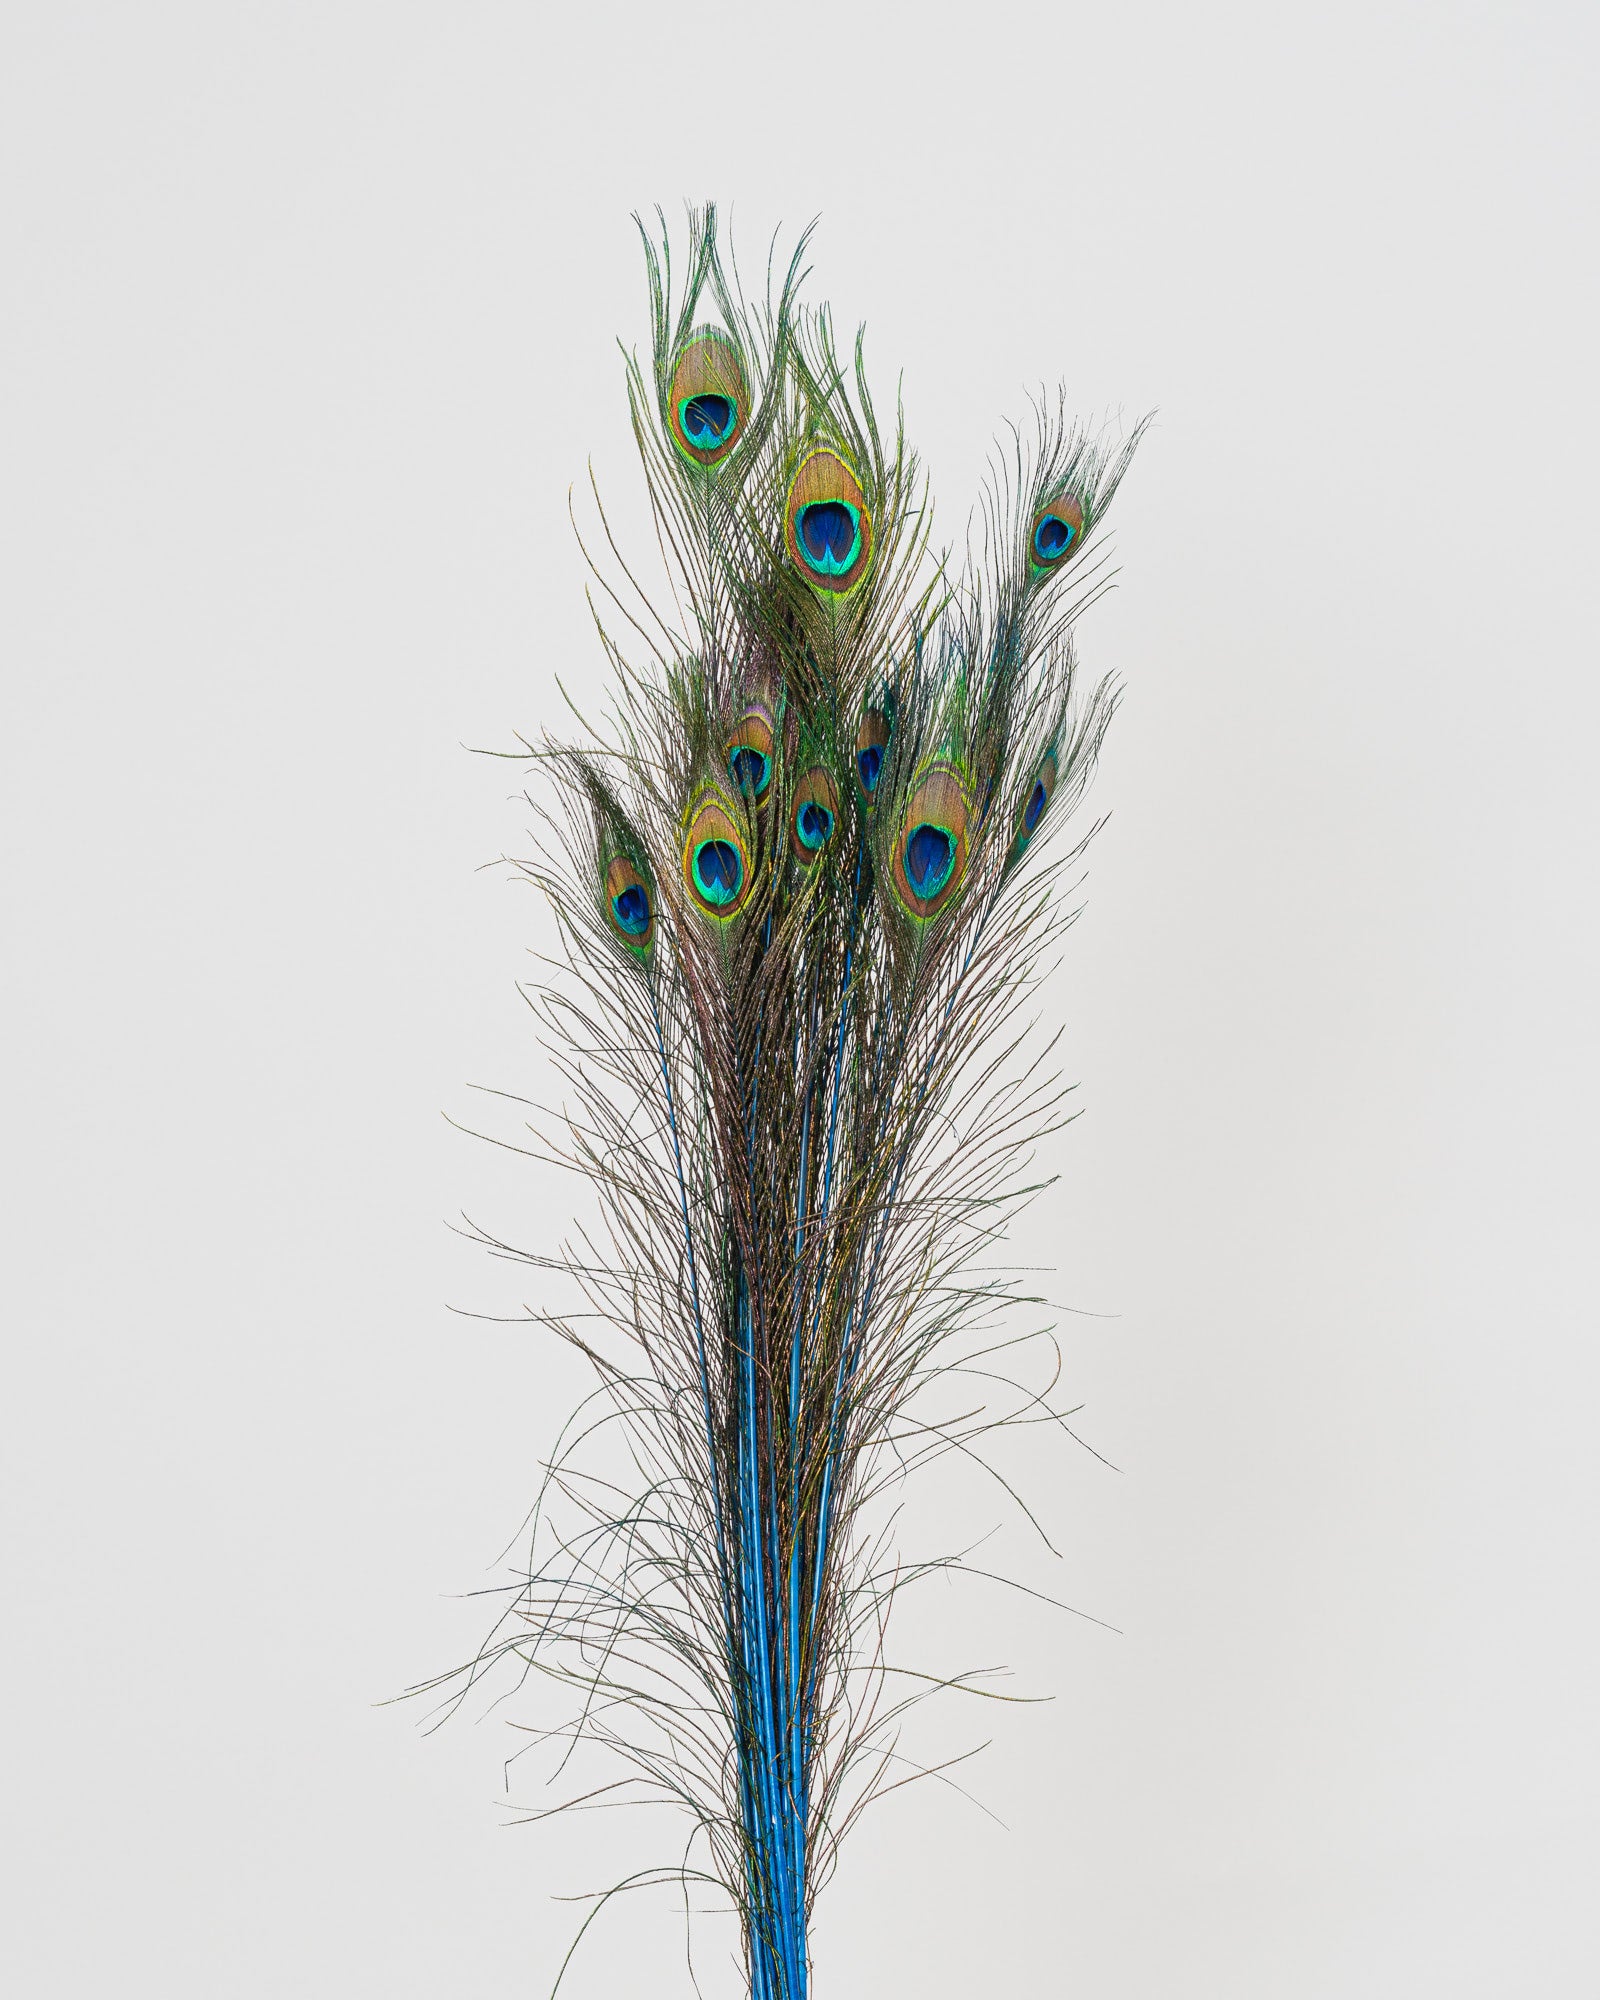 Peacock feathers, a symbol of Good Luck, piume di pavone